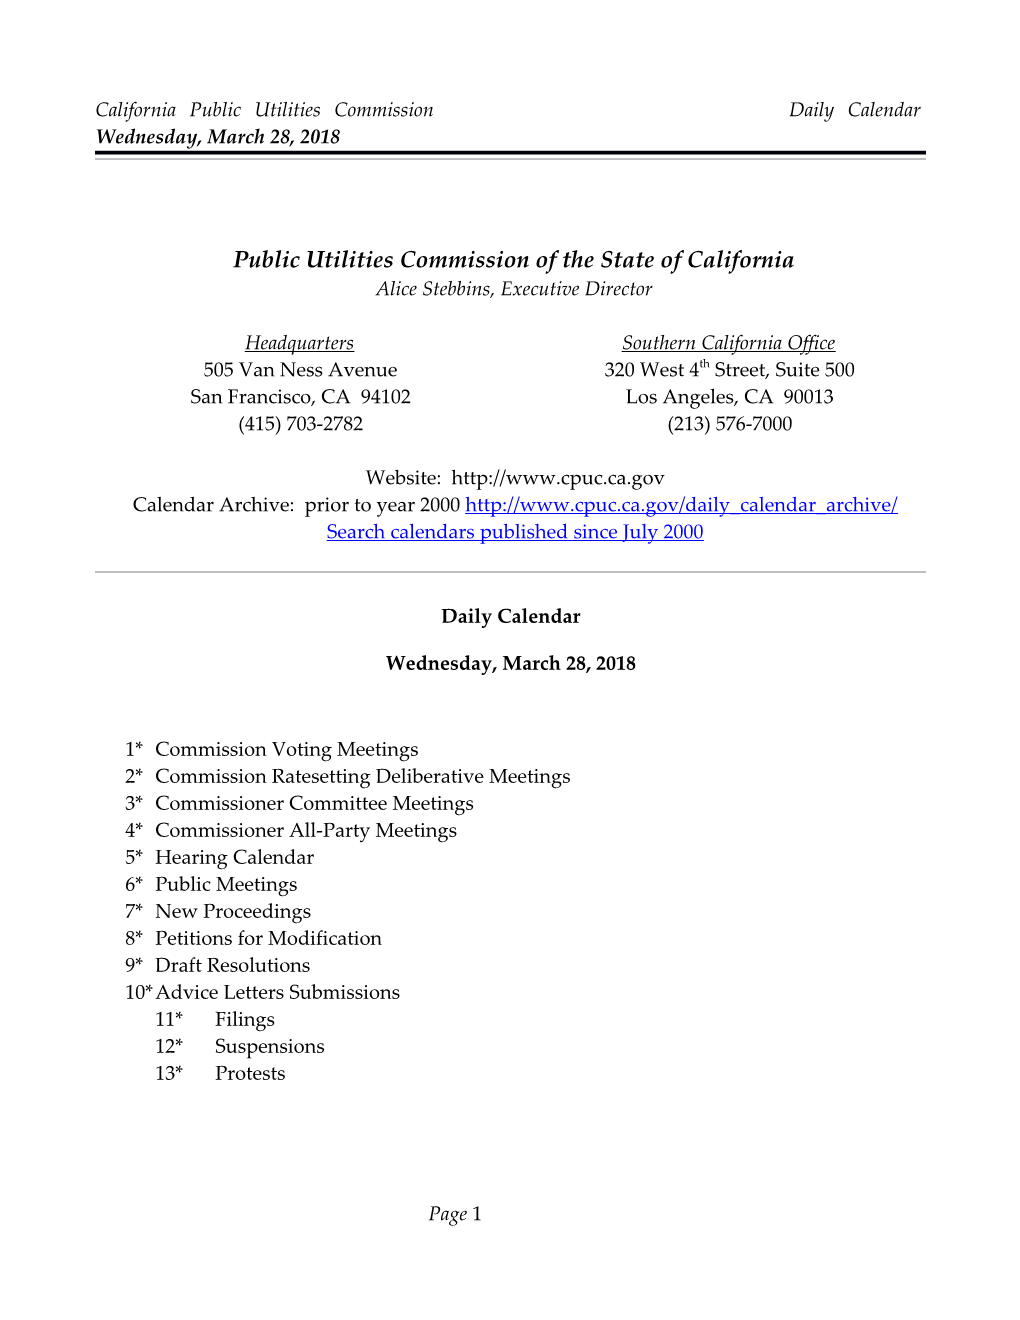 California Public Utilities Commission Daily Calendar Wednesday, March 28, 2018